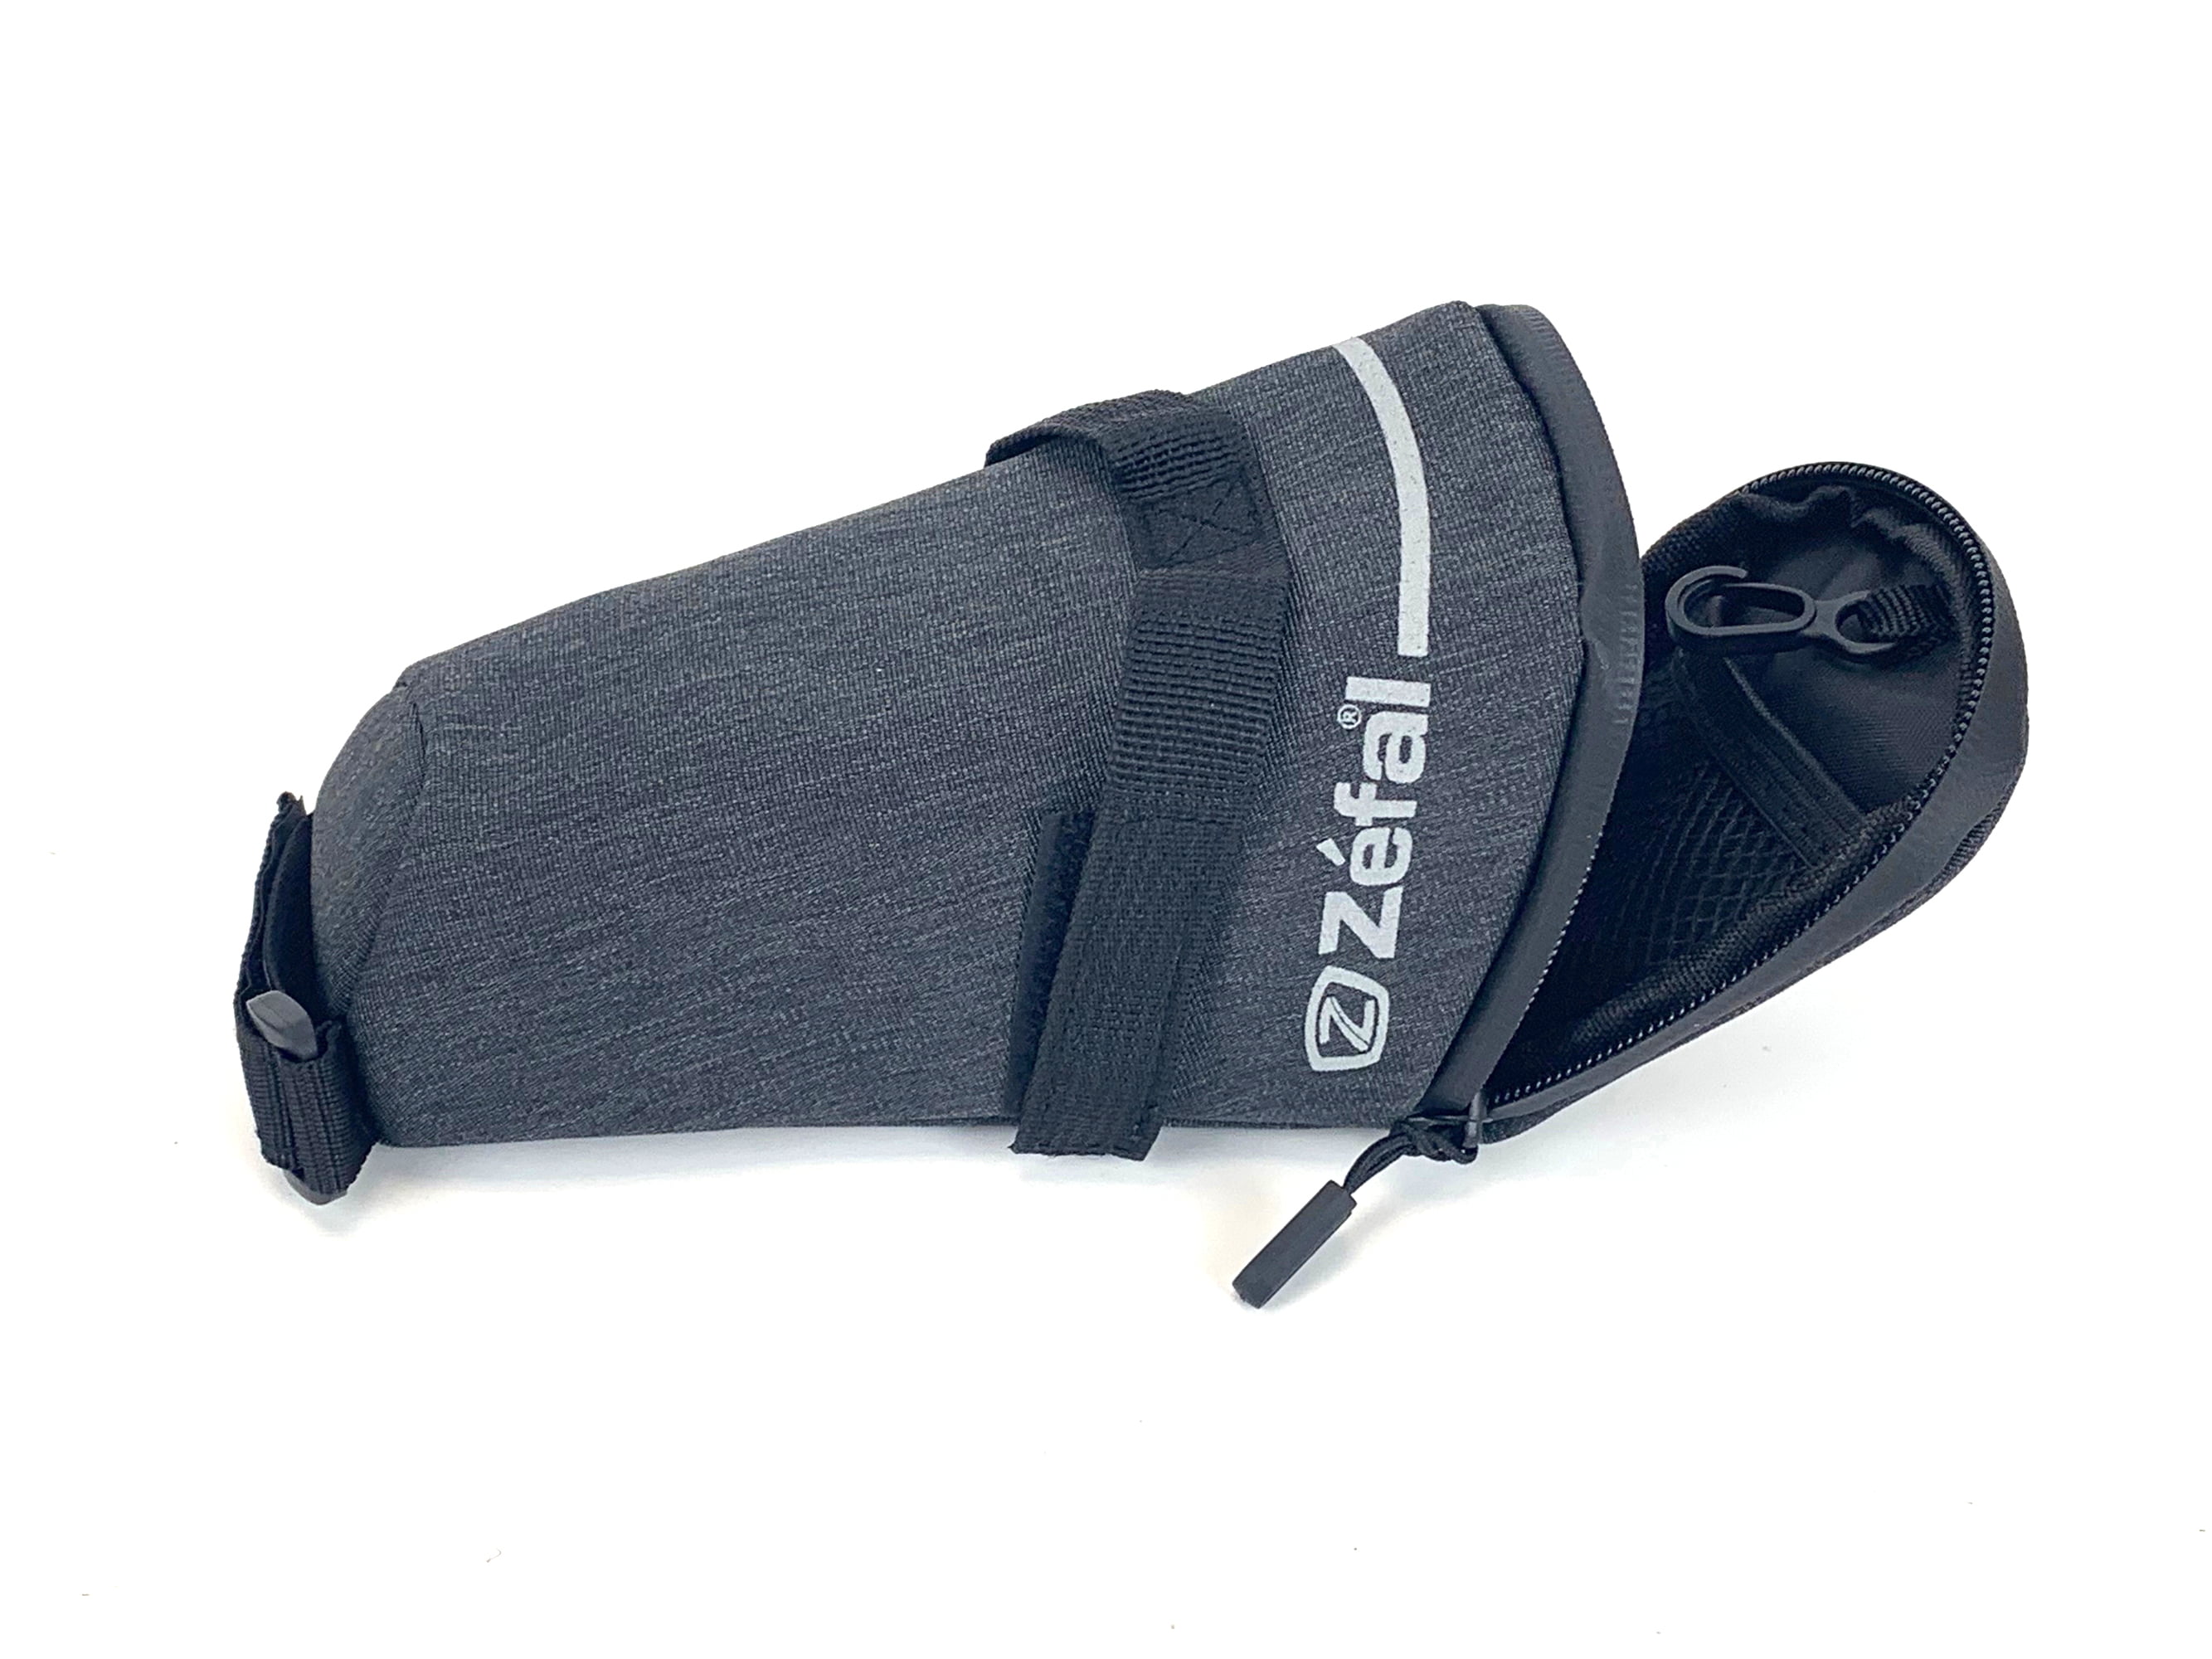 Bike Zefal Deluxe Under-Seat Bicycle Bag No Tools Required Universal Mount